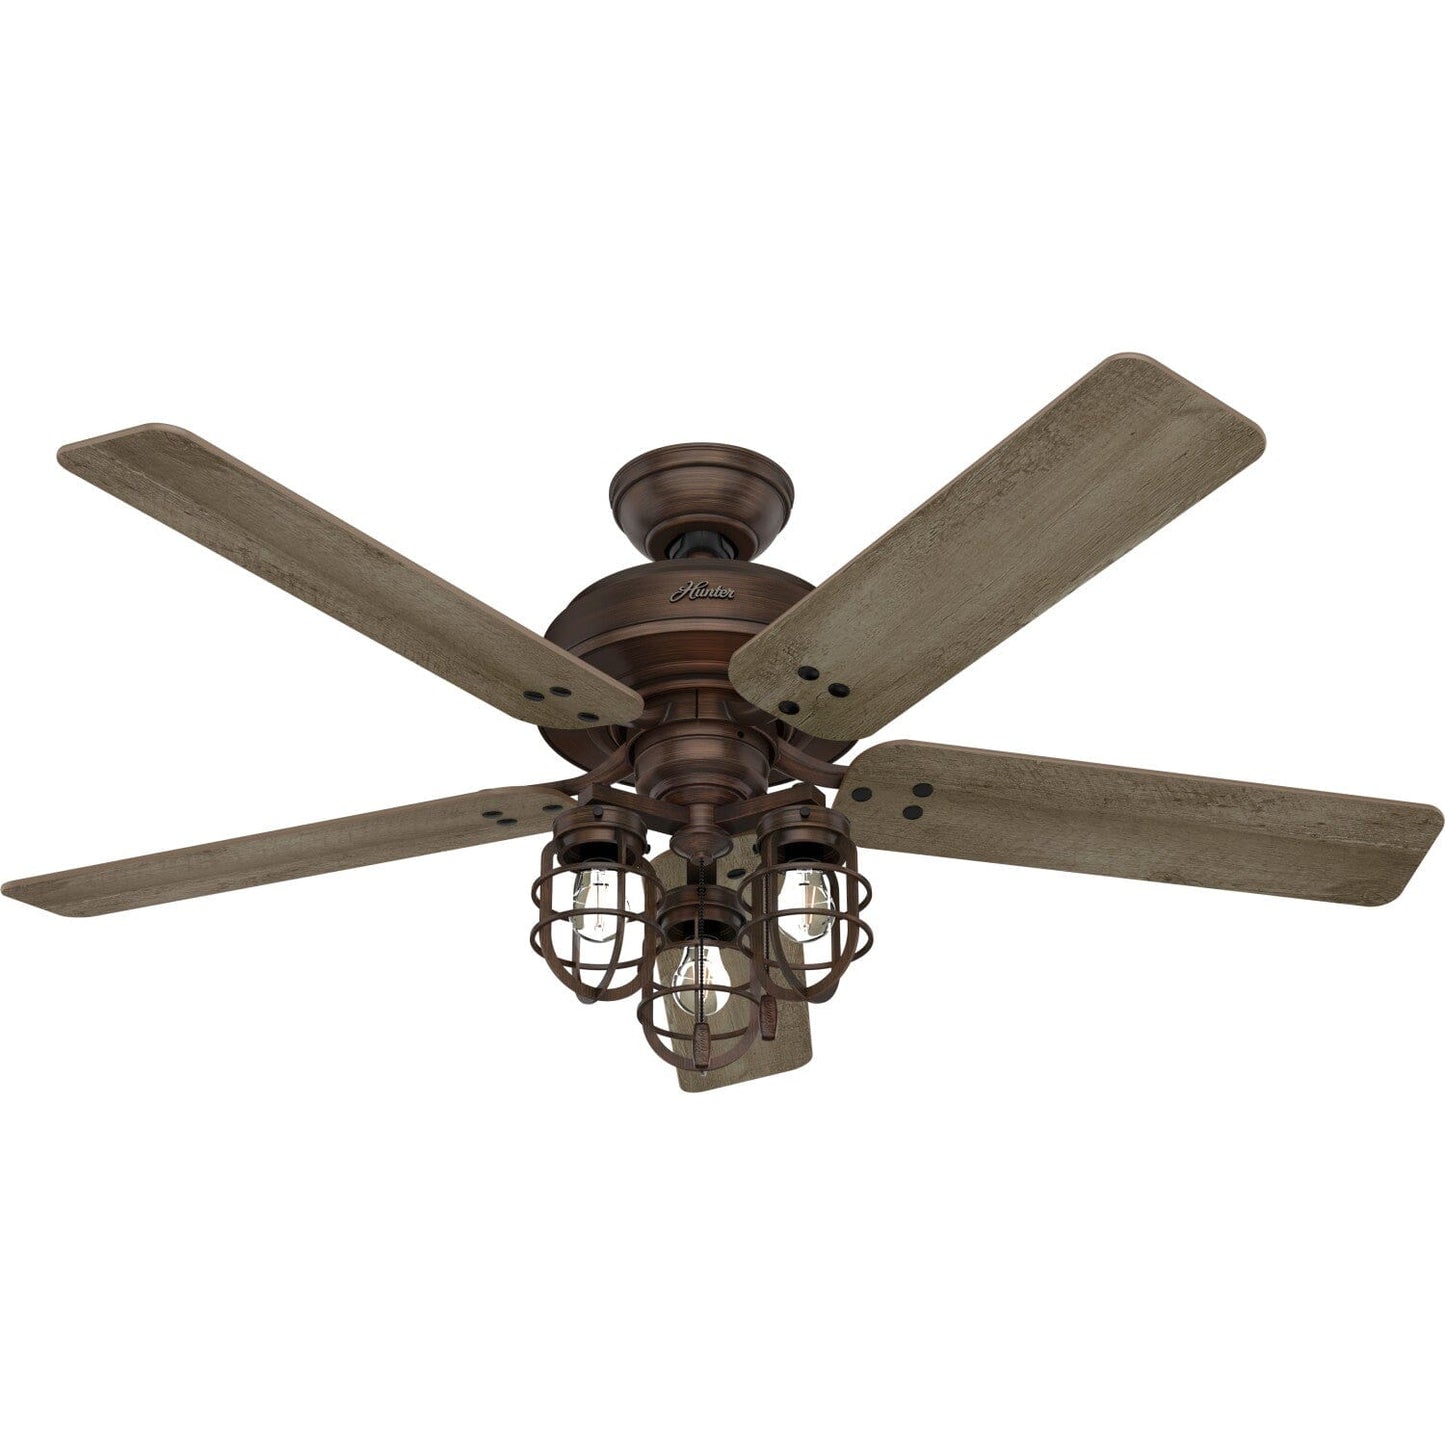 Port Isabel Outdoor with LED Light 52 inch Ceiling Fans Hunter Weathered Copper - Grey Pine 